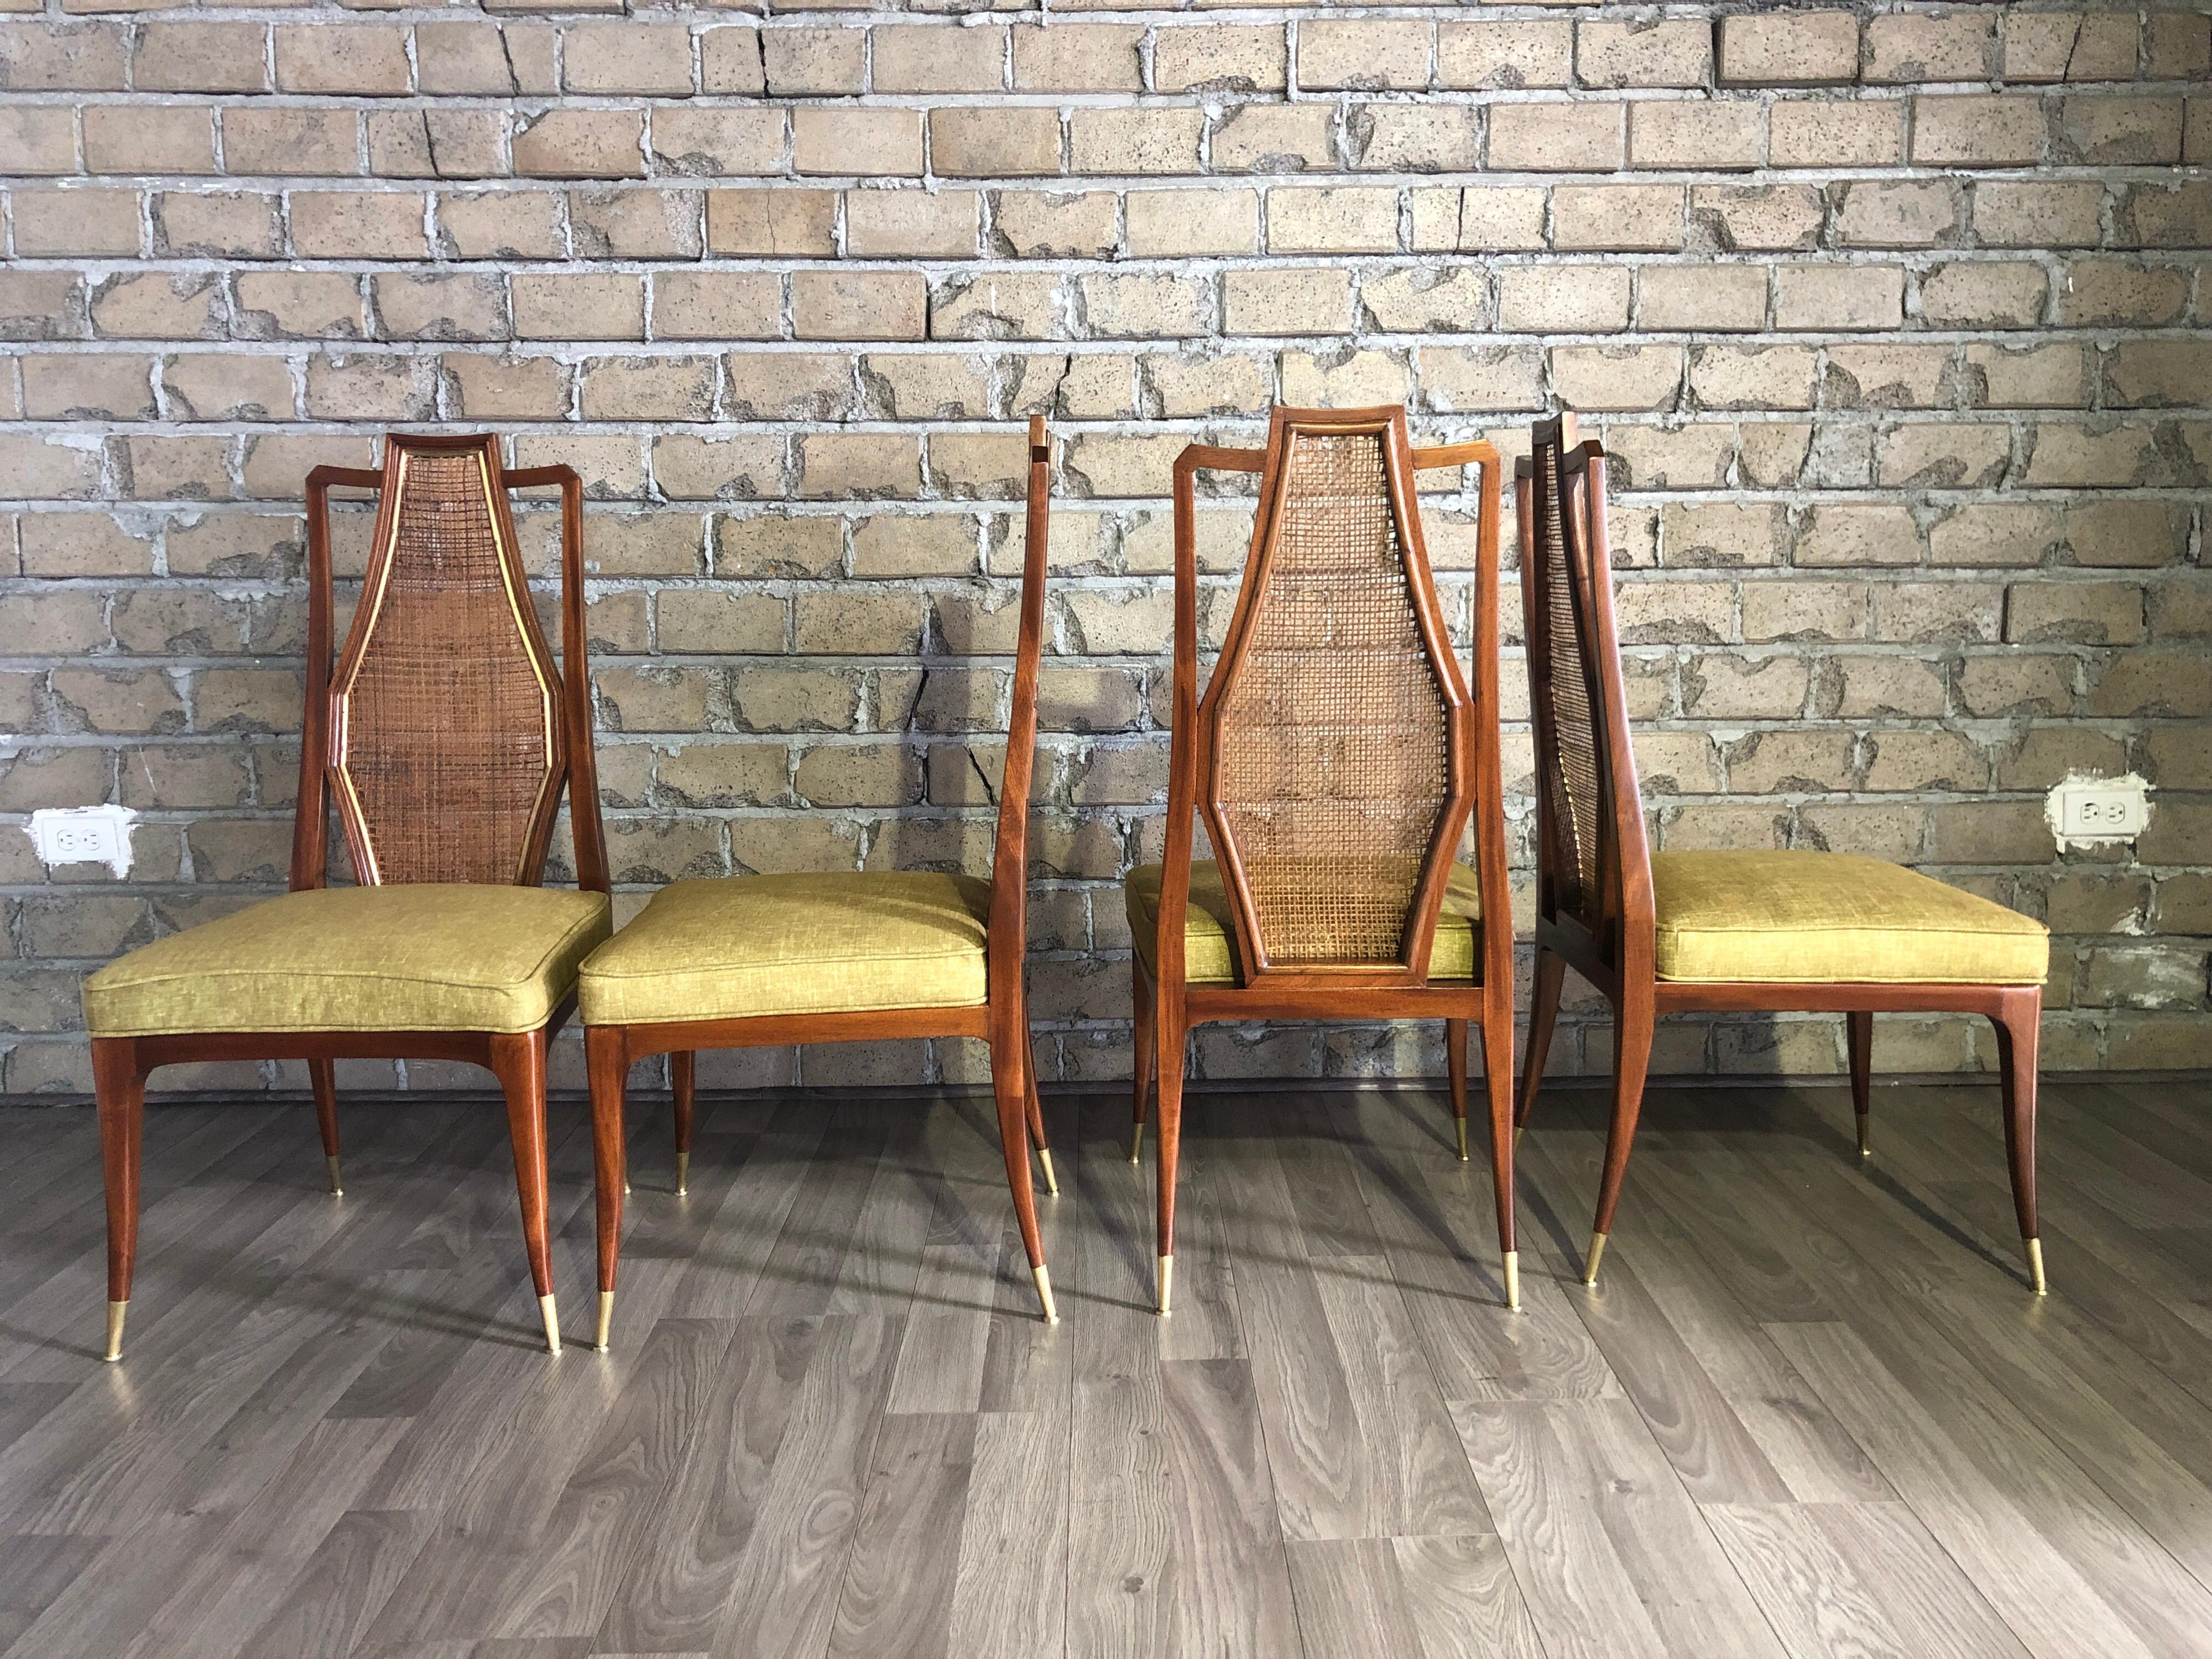 Four vintage Mid-Century Modern dining chairs. The chairs are from the late 1950s, the design is in all its components, the architectural profile backrest with its original cane and outlined in front of a brass strip, the curved front seat makes it